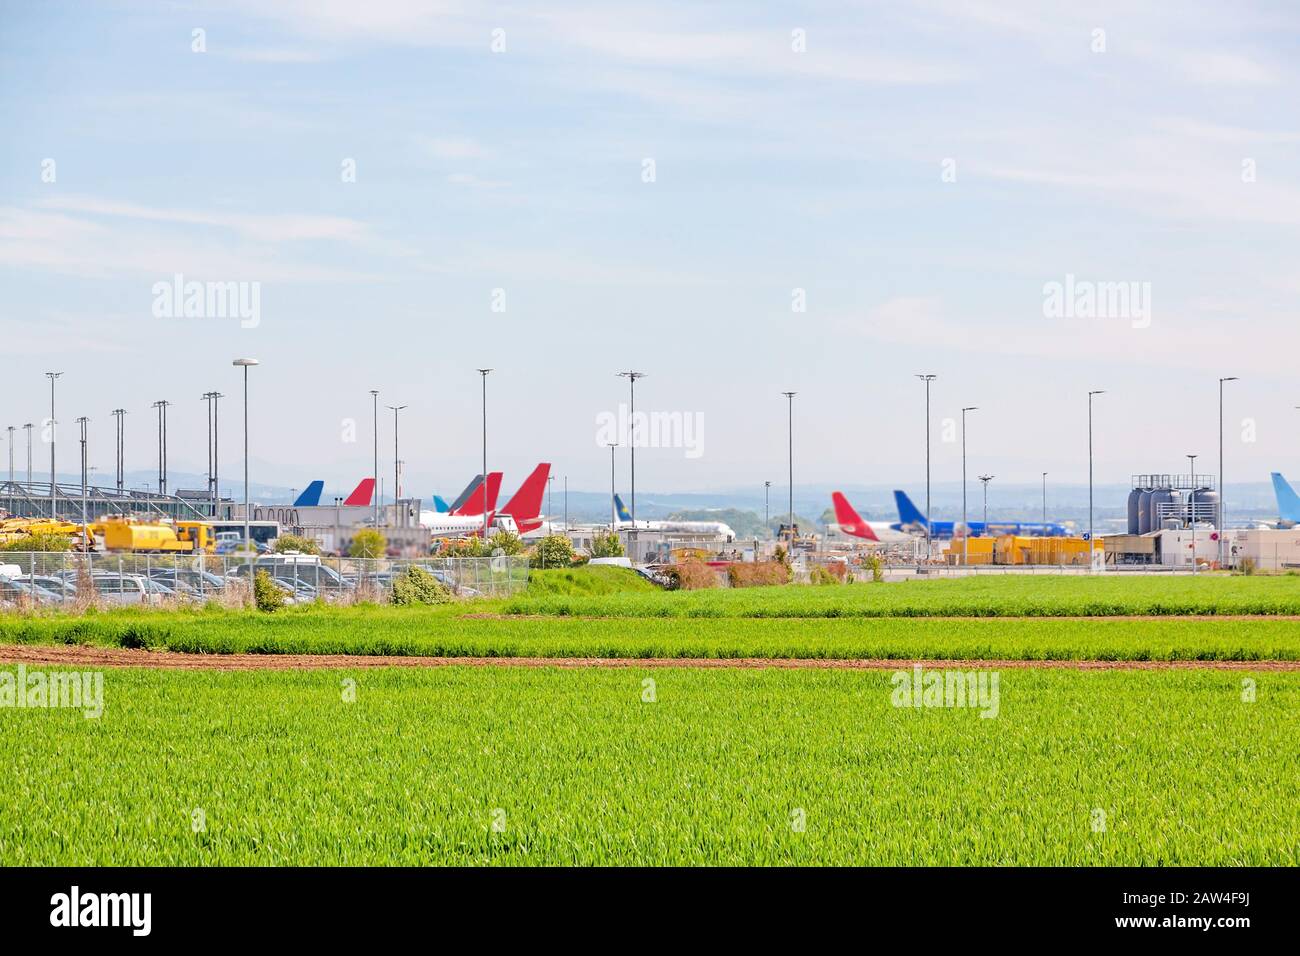 Airport Stuttgart, planes of different airlines in parking position in front of terminal, green field in foreground Stock Photo